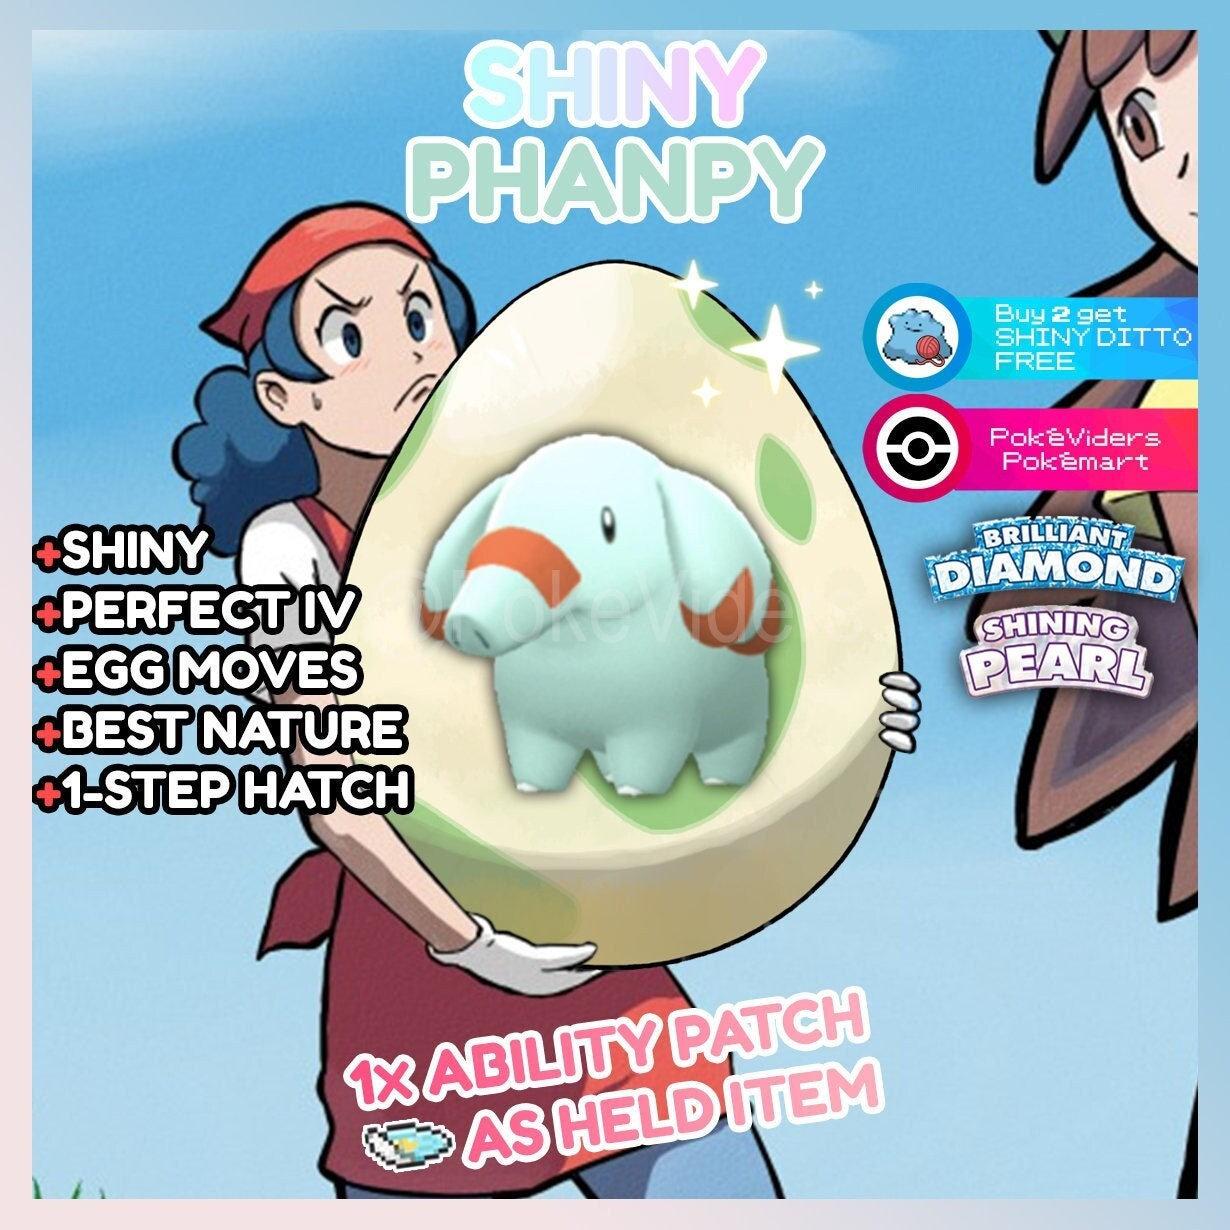 Pokemon Brilliant Diamond & Shining Pearl / Shiny Egg Phanpy / 6IV / Egg  Moves / Best Nature / Fast Trade / Ability Patch / Ditto